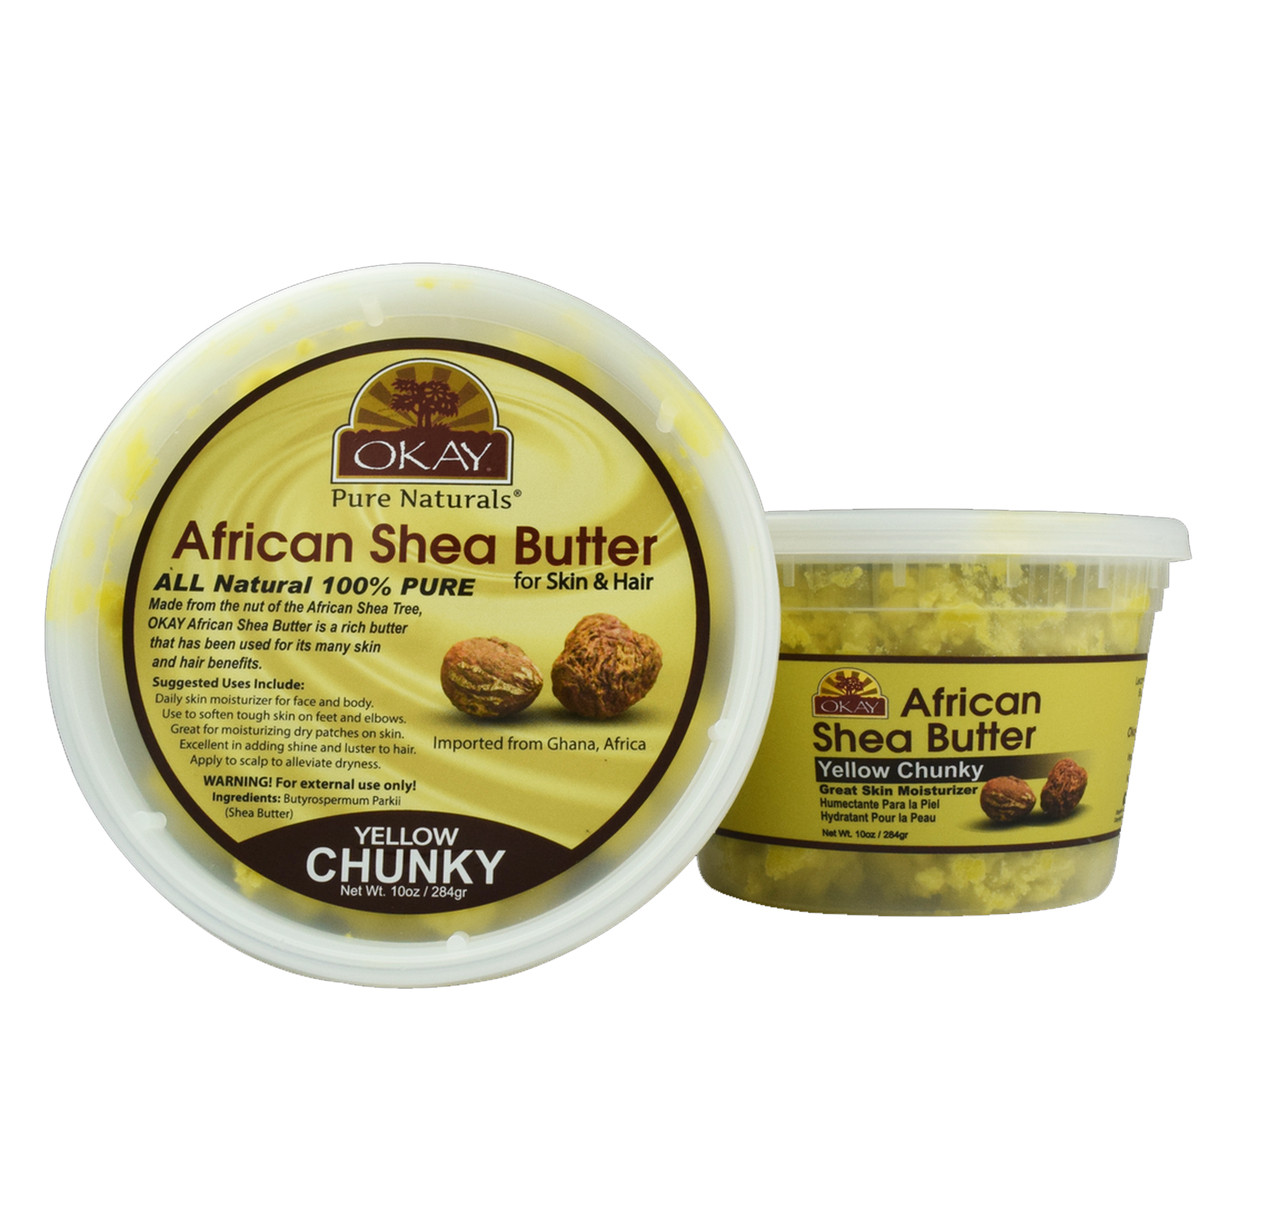 Why Use Shea Butter for Skin?